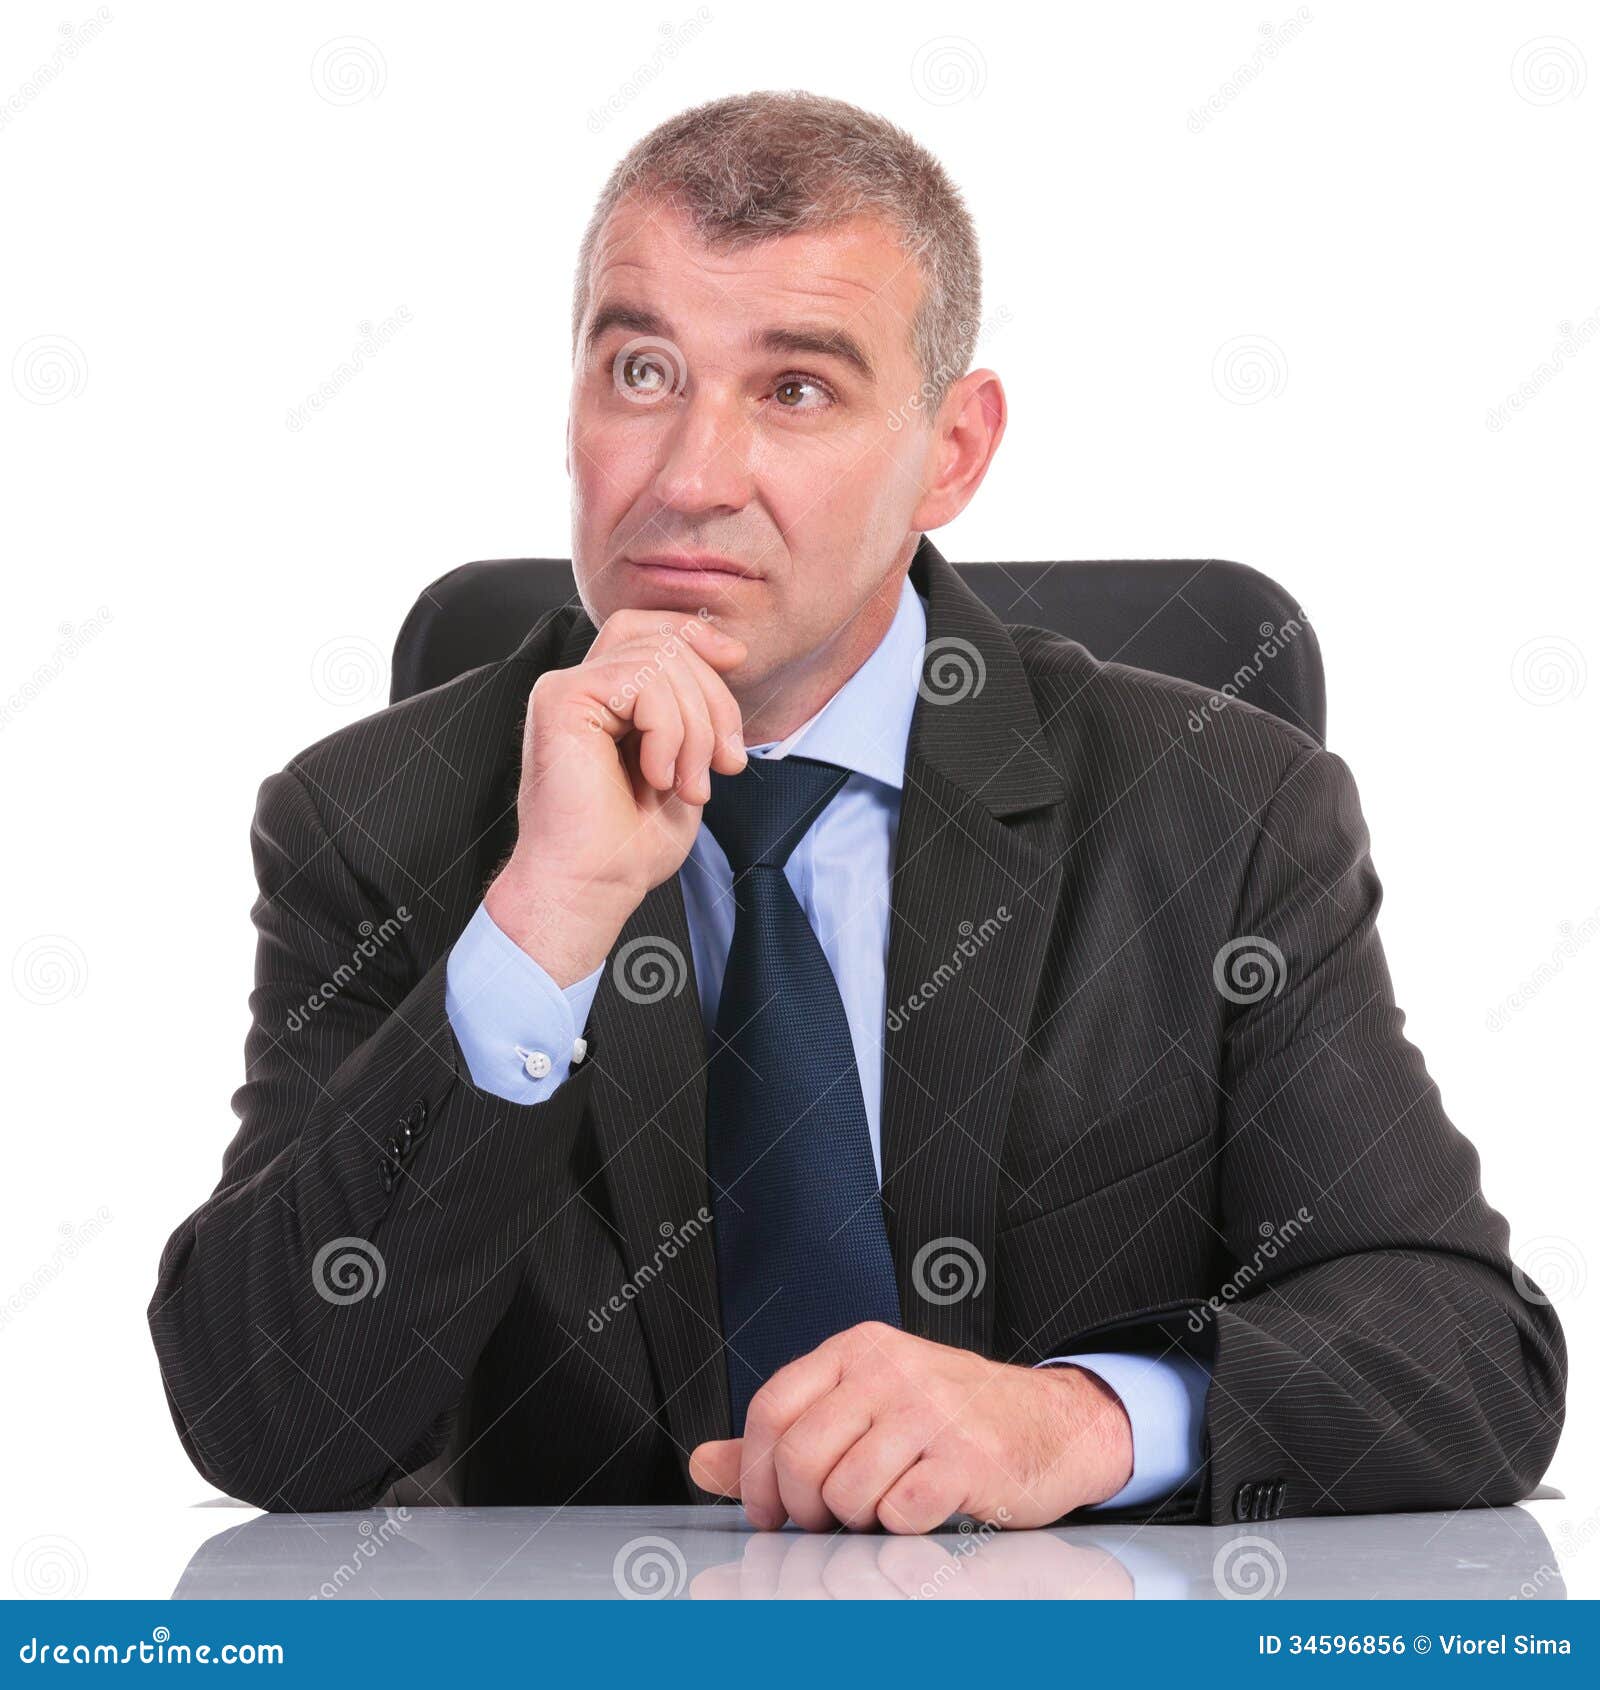 business-man-desk-looks-away-pensively-sitting-looking-holding-his-hand-his-chin-white-background-34596856.jpg